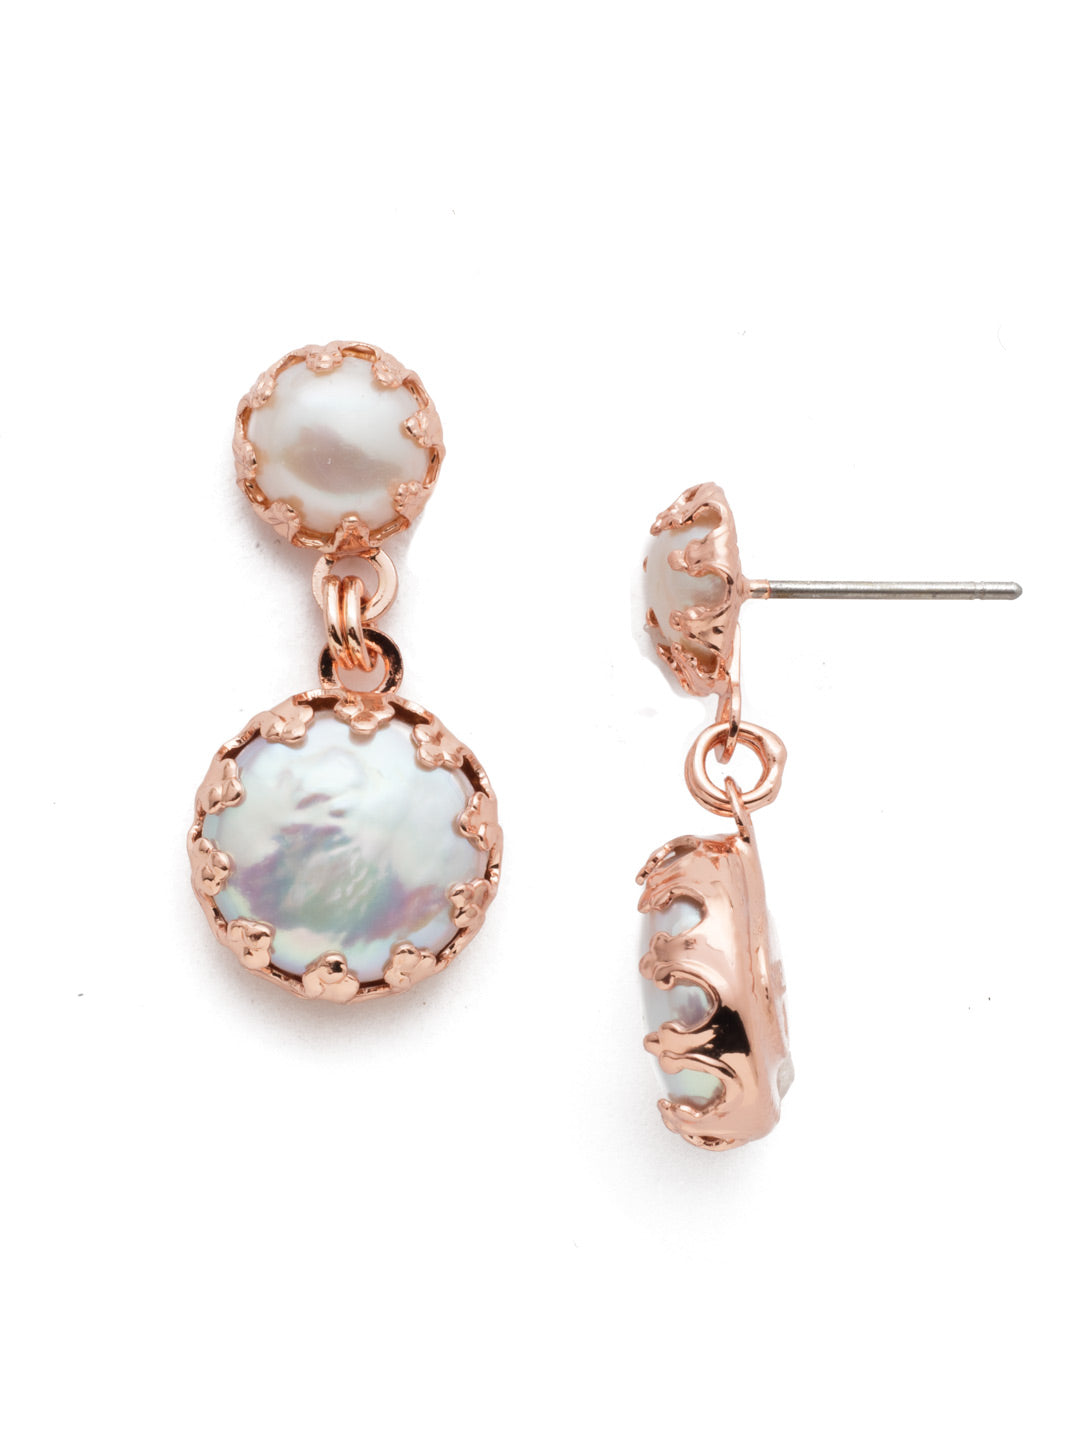 Oaklyn Dangle Earrings - EEP1RGCAZ - <p>The Oaklyn Dangle Earrings are wardrobe essentials. Classic pearls and delicate and intricate metal details combine in a pair that will be passed down for generations. From Sorrelli's Crystal Azure collection in our Rose Gold-tone finish.</p>